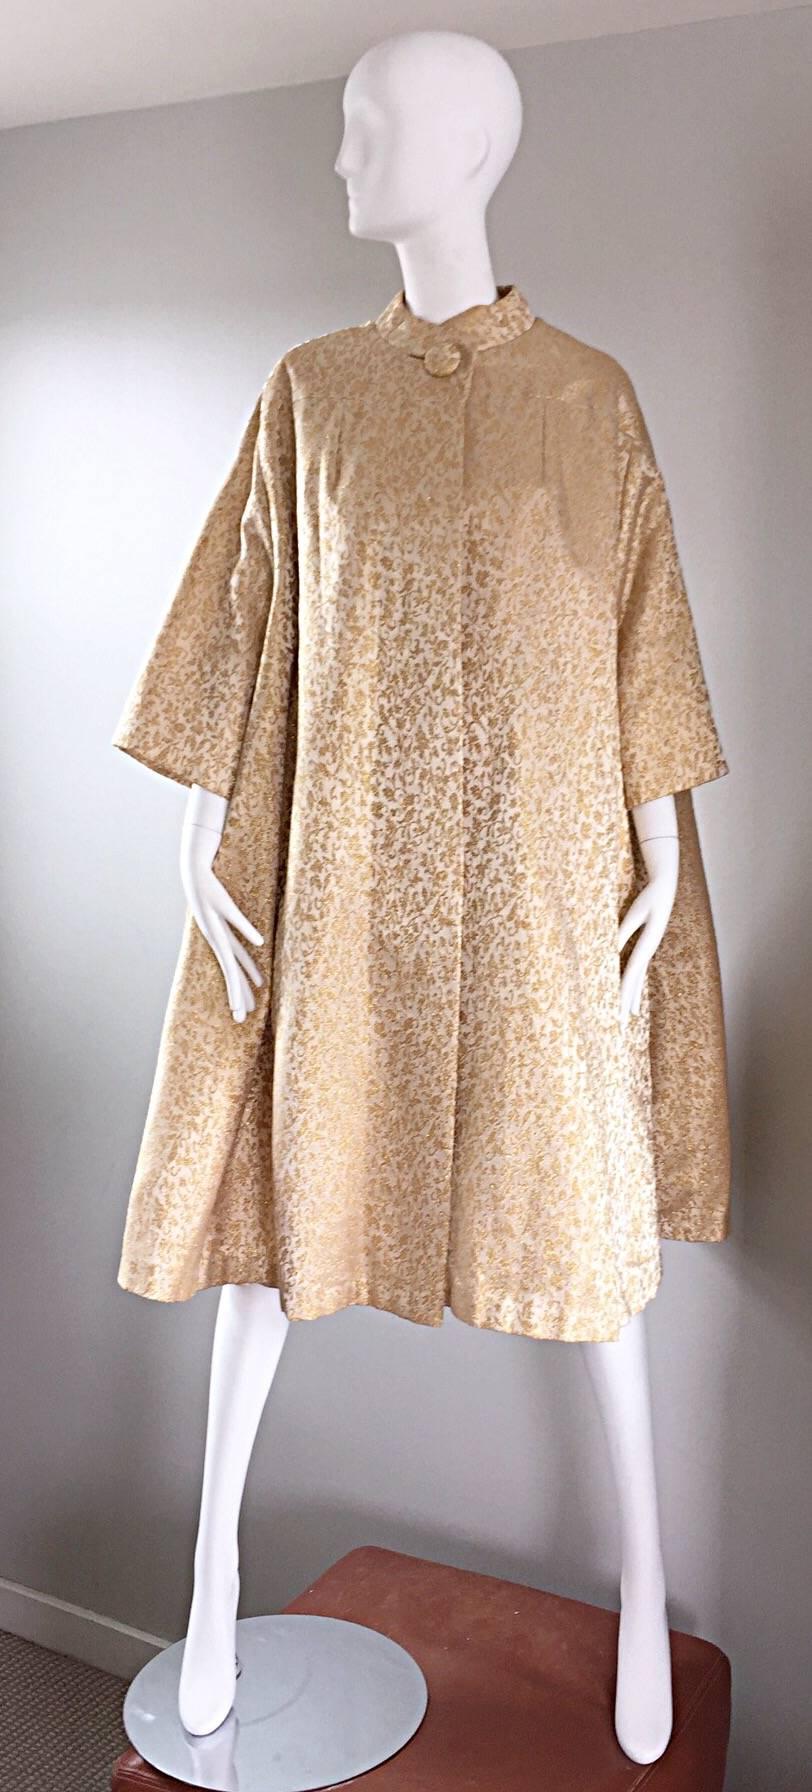 Sensational vintage 50s trapeze/opera jacket by THE SURPRISING DRESS-ETERIA! Features an allover gold metallic and ivory printed silk brocade! Simple stunning fit that will accommodate nearly any size from Small - XL! One singular button at collar.